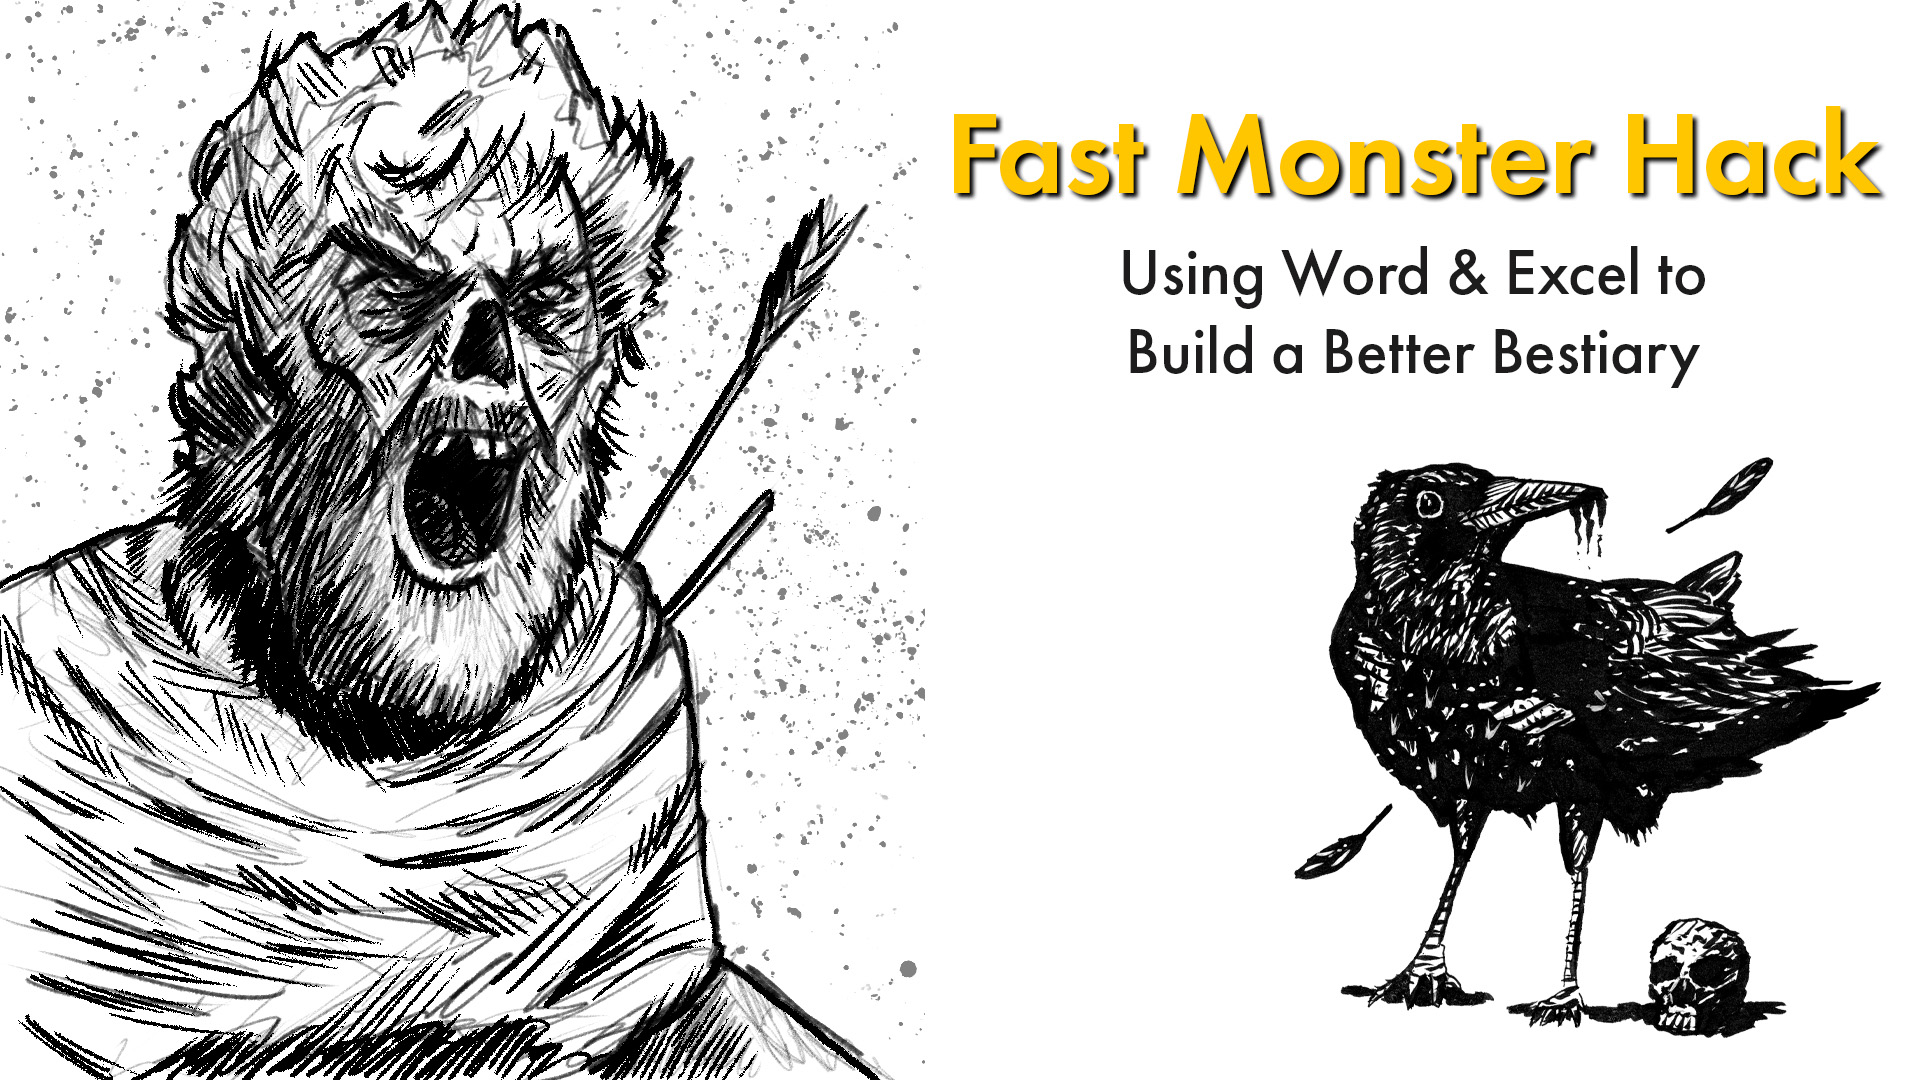 Fast Monster Hack: Using Word & Excel to Build a Better Bestiary